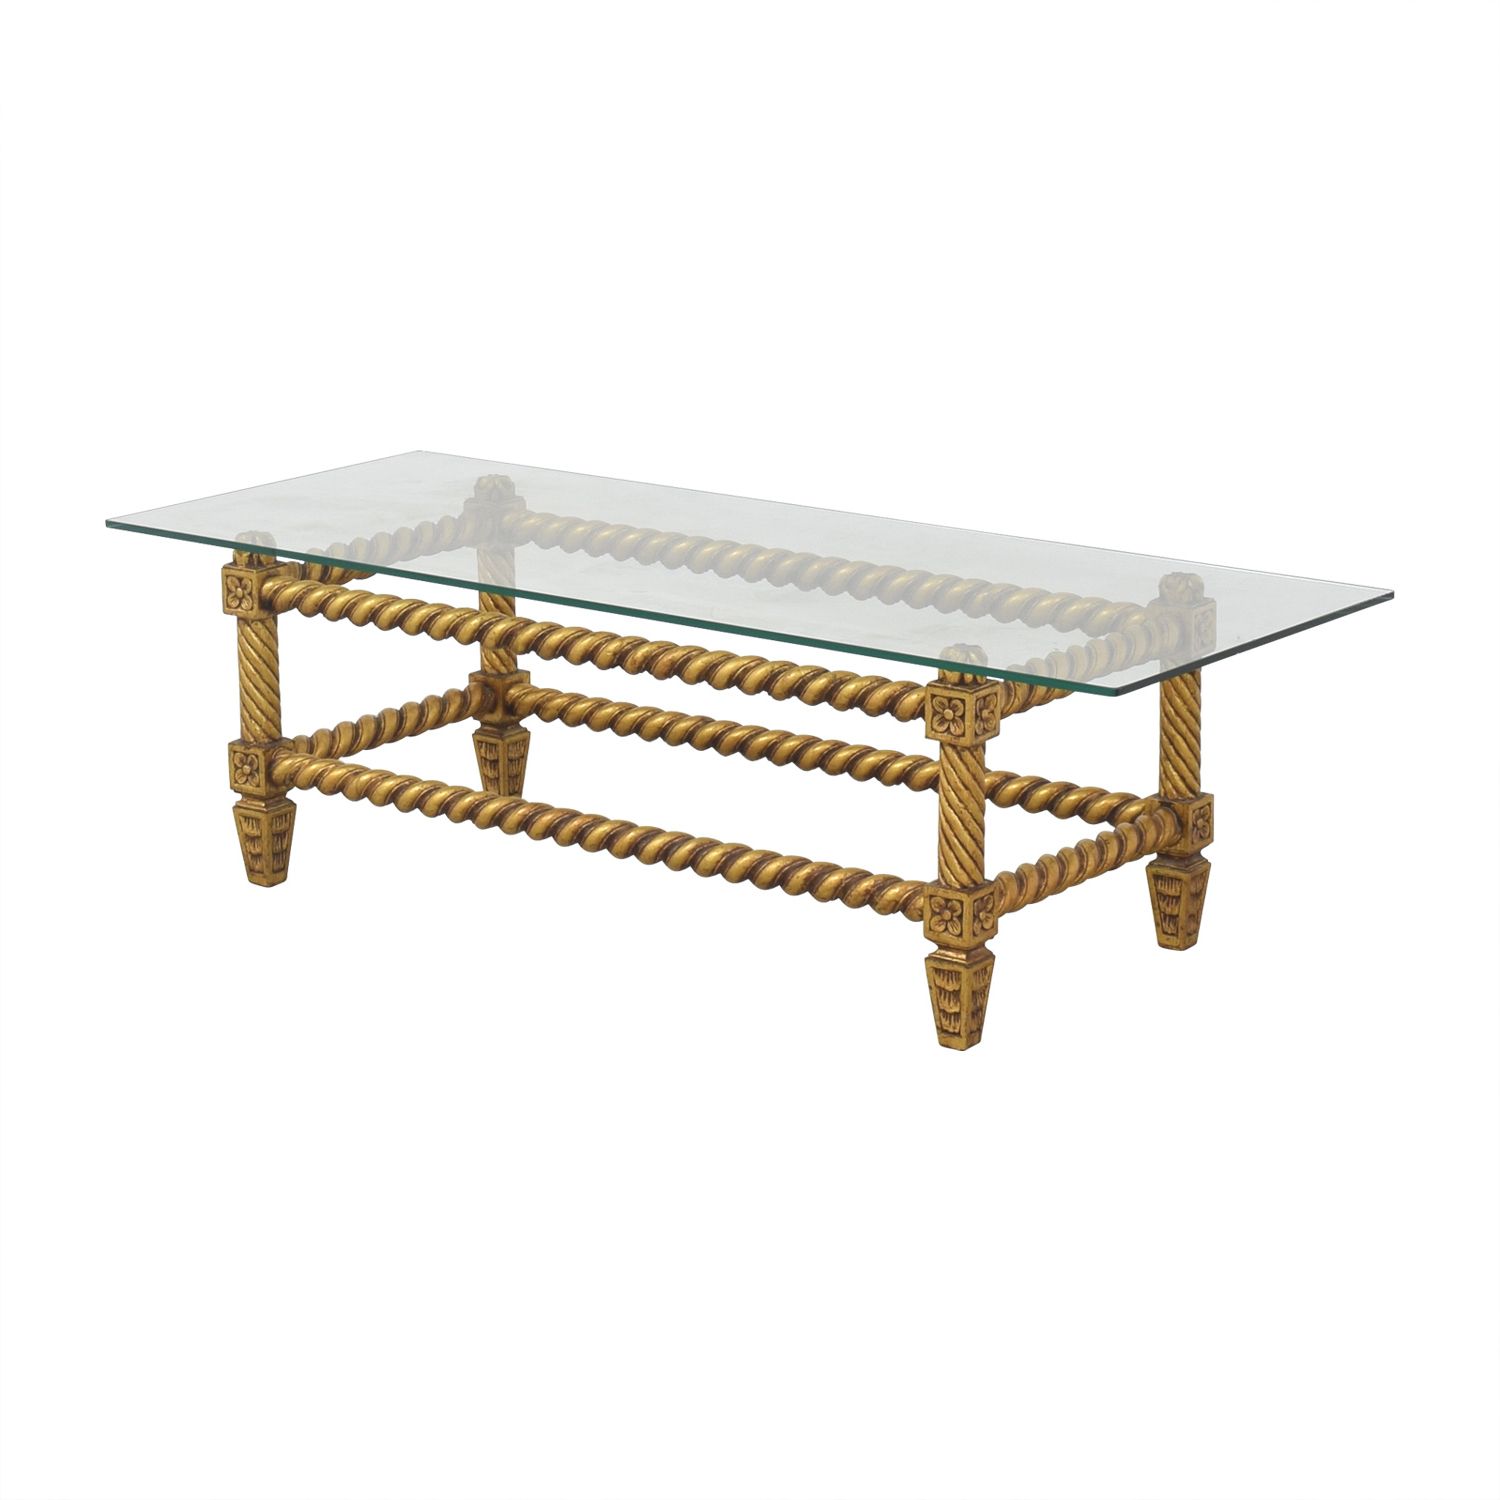 [%90% Off – Antique Glass And Gold Framed Coffee Table / Tables With Regard To Best And Newest Antique Blue Gold Coffee Tables|antique Blue Gold Coffee Tables For Newest 90% Off – Antique Glass And Gold Framed Coffee Table / Tables|widely Used Antique Blue Gold Coffee Tables With 90% Off – Antique Glass And Gold Framed Coffee Table / Tables|well Known 90% Off – Antique Glass And Gold Framed Coffee Table / Tables For Antique Blue Gold Coffee Tables%] (View 10 of 10)